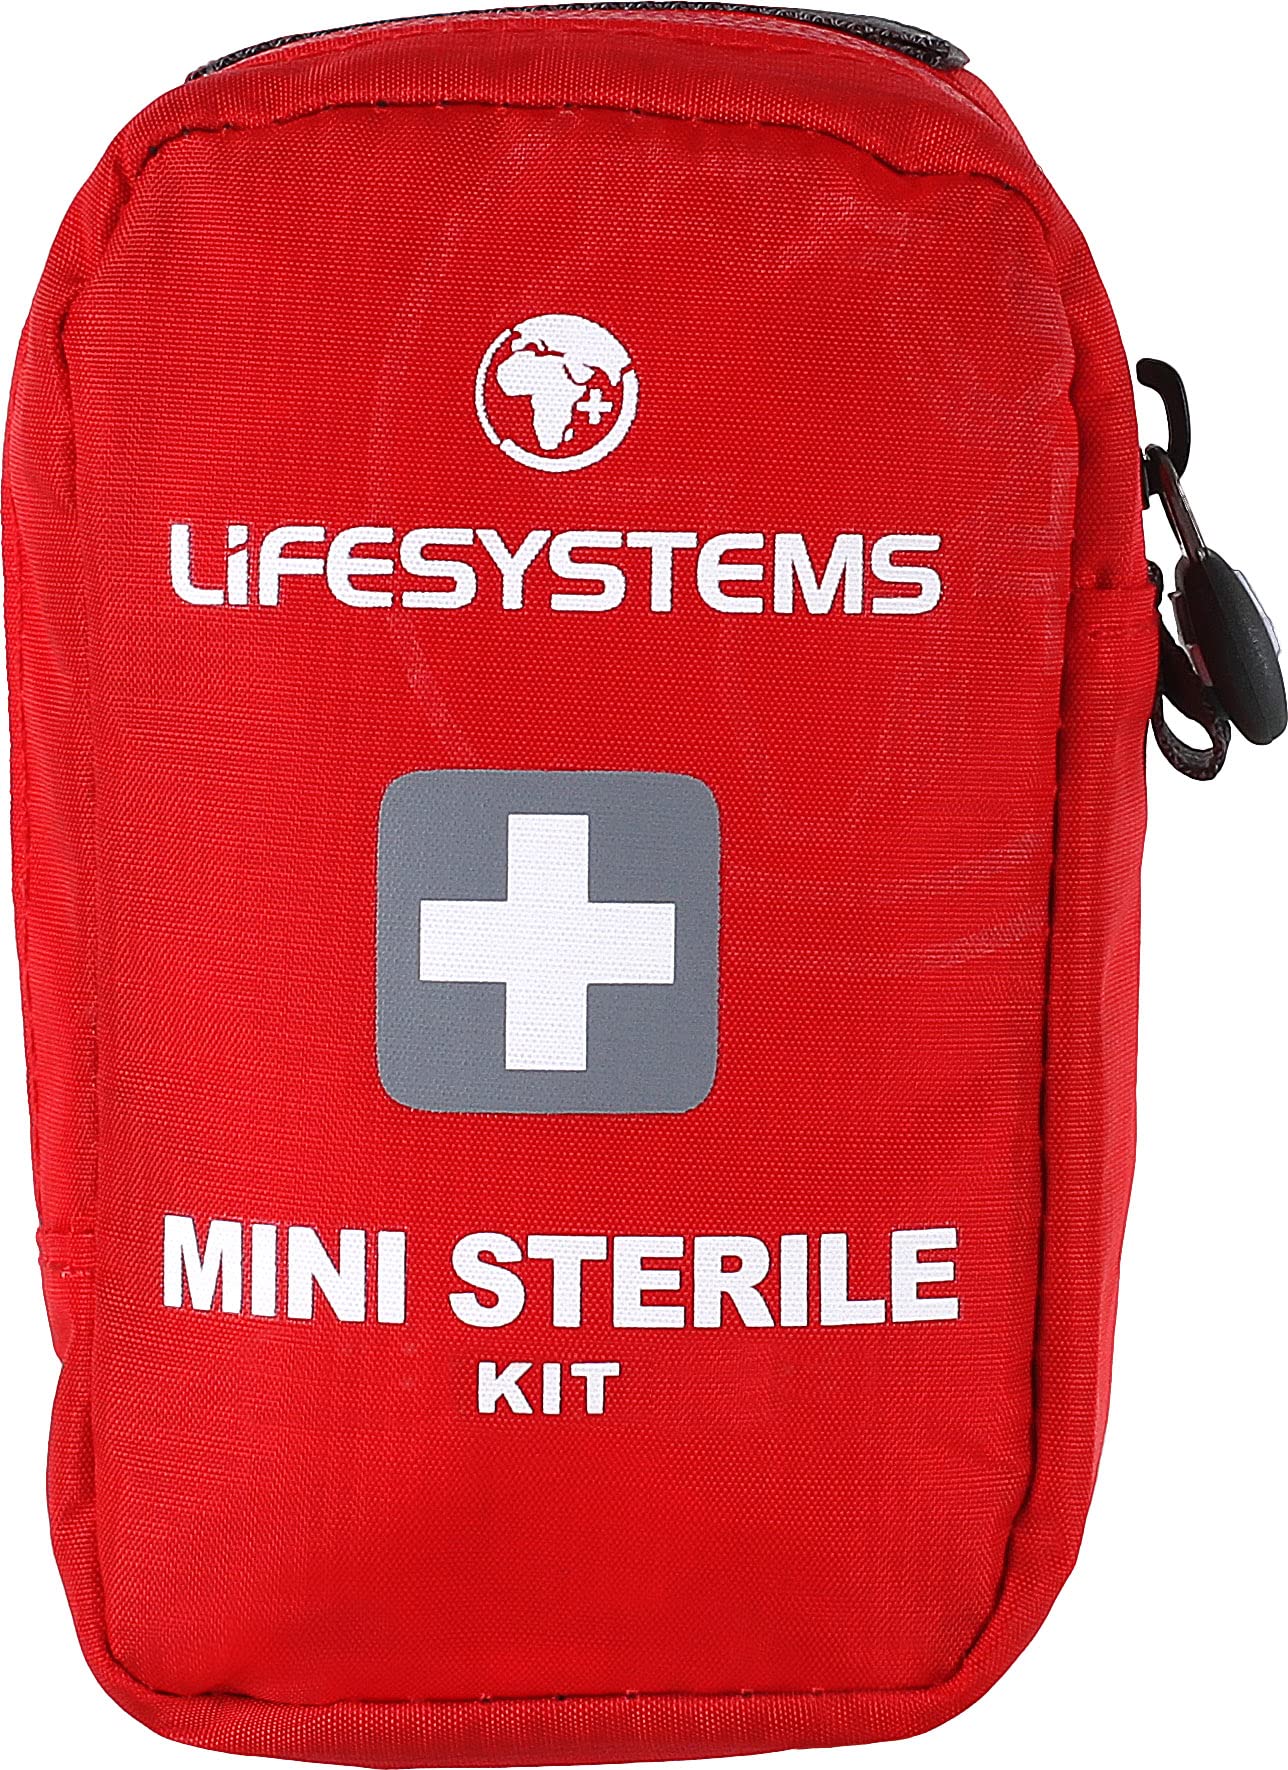 Lifesystems Mini Sterile Kit, CE Certified Contents, Specifically Designed for Travel And Holiday